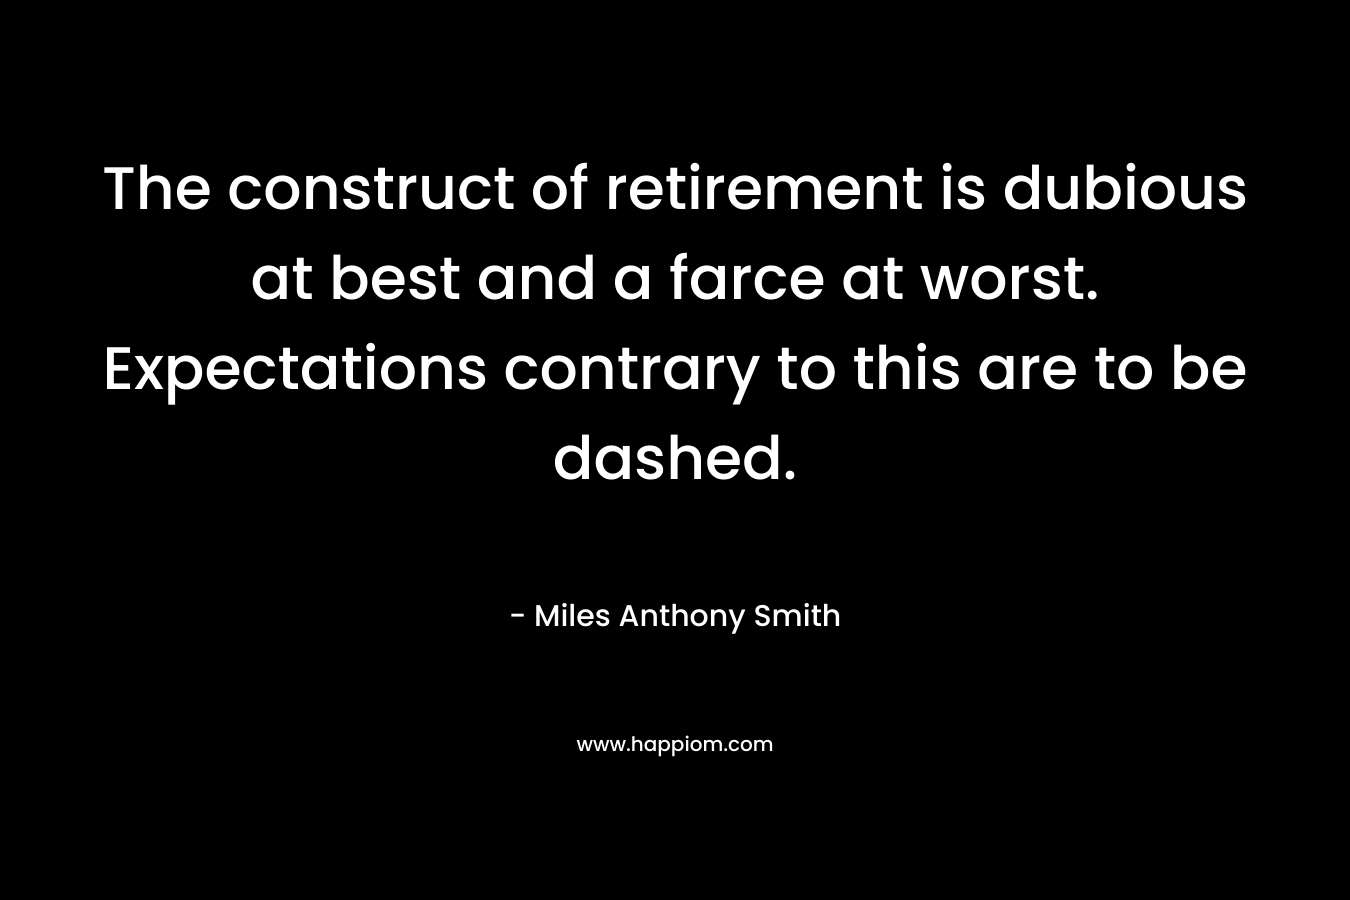 The construct of retirement is dubious at best and a farce at worst. Expectations contrary to this are to be dashed. – Miles Anthony Smith